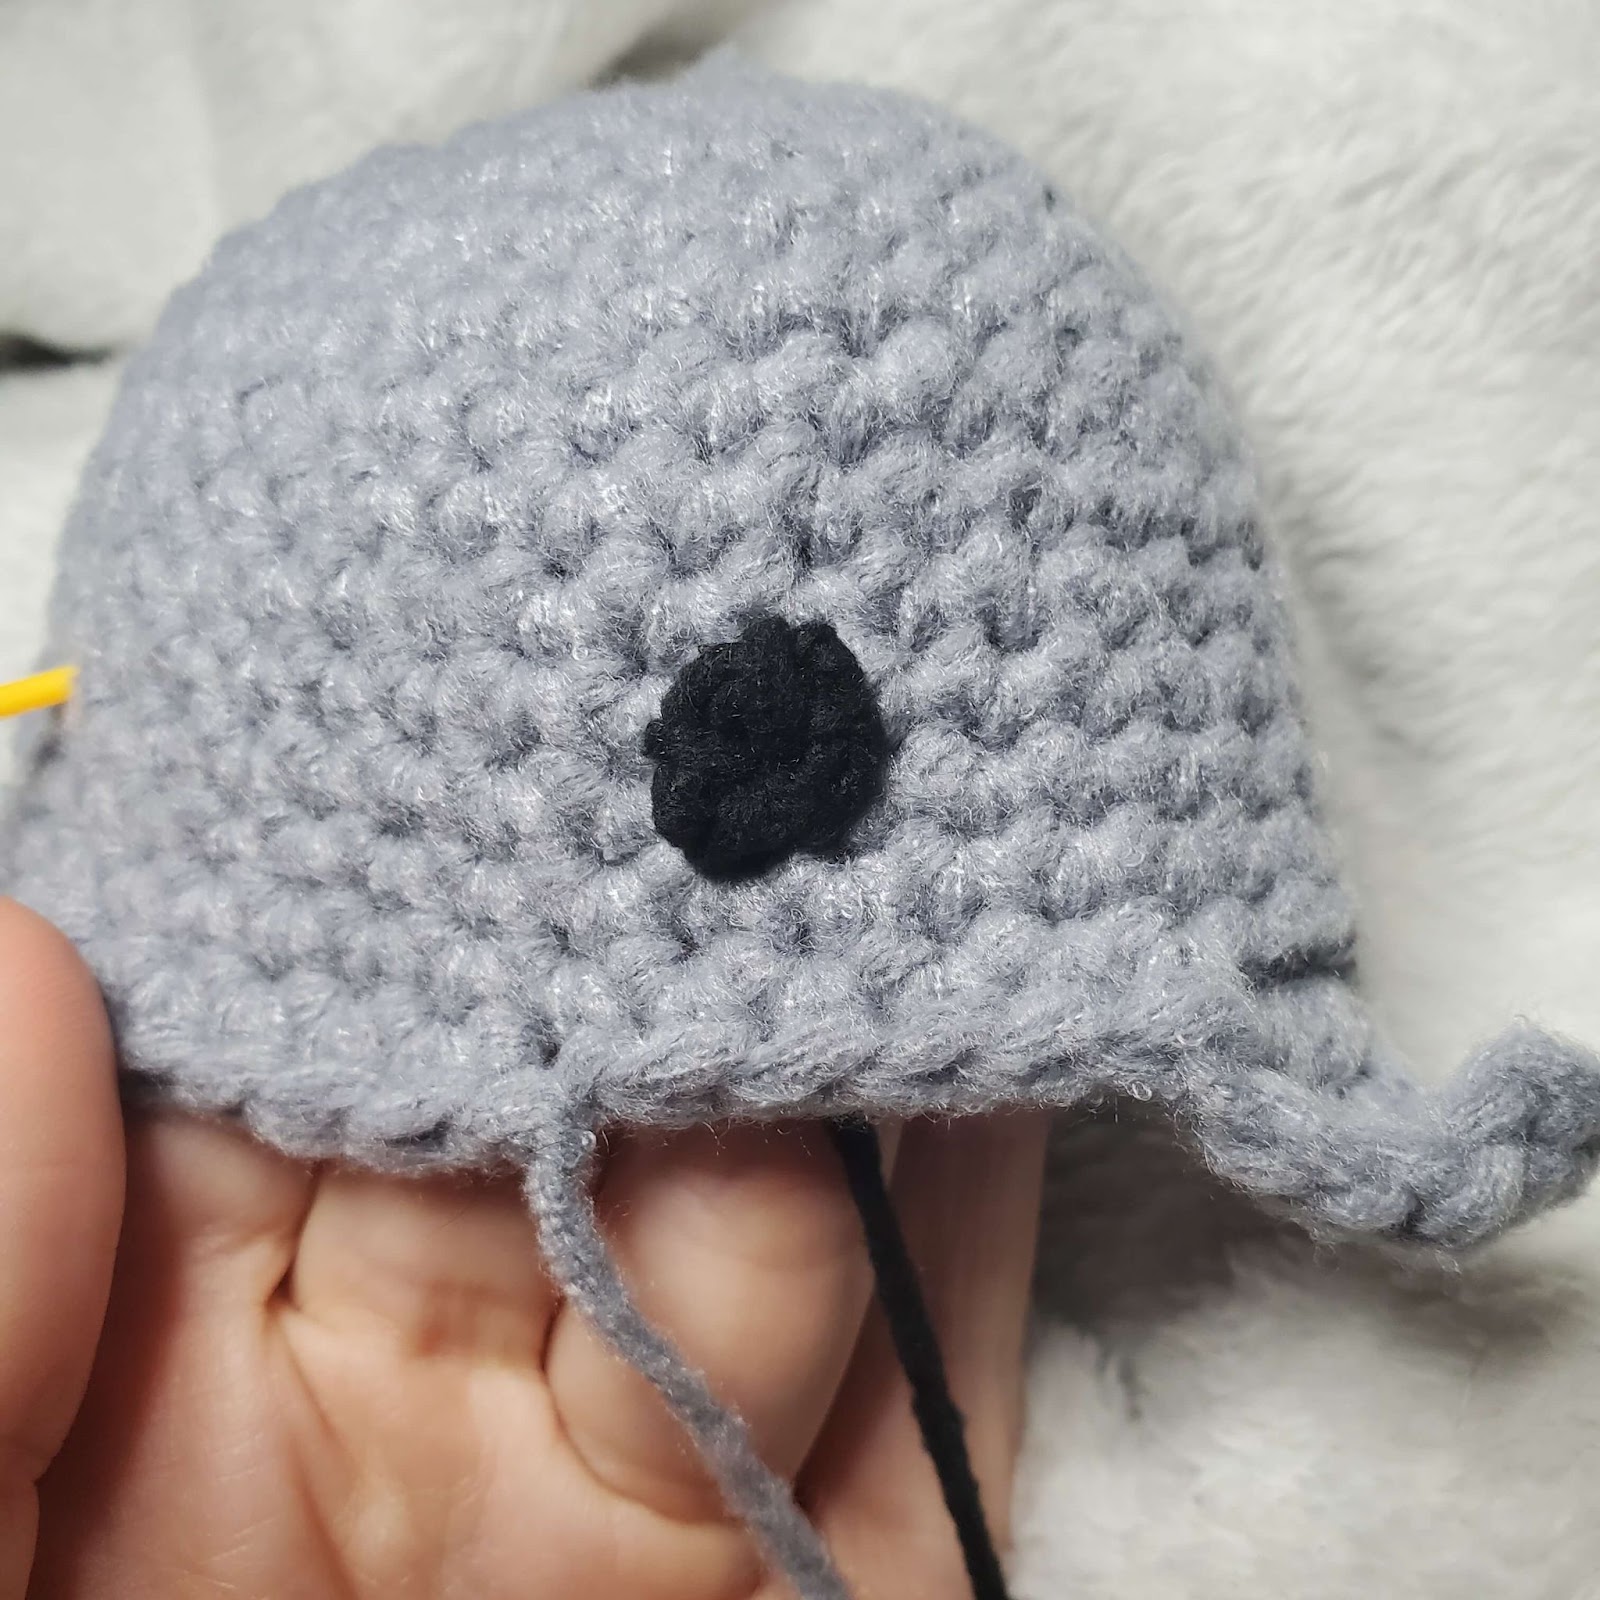 Image shows the completed embroidery of the crochet shark lovey eye.